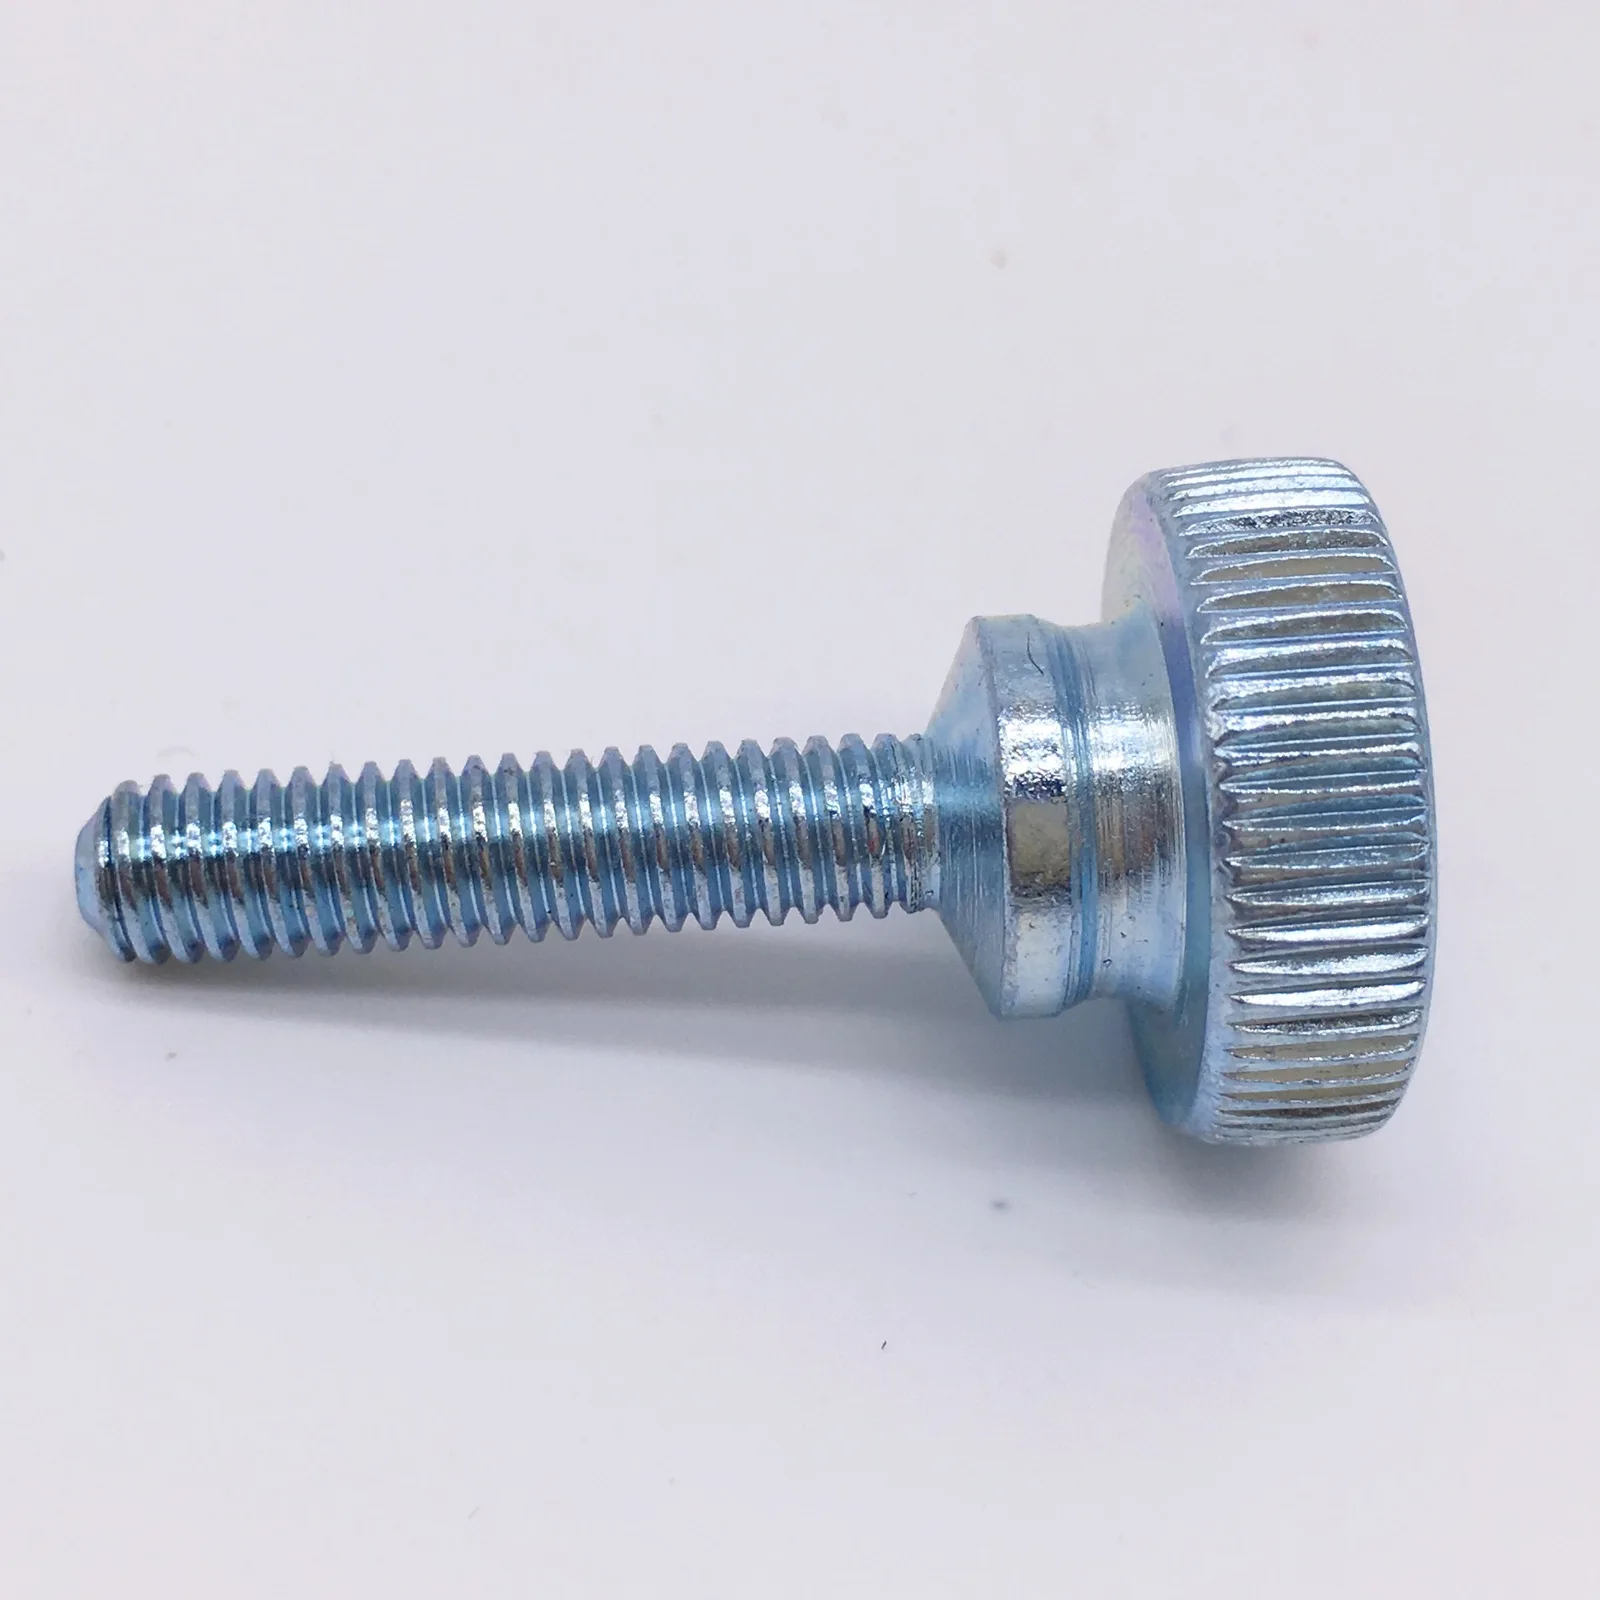 

M4x16 Thumb Screws Knurled Head With Should Bolts Metric Zinc Plated Pack 100